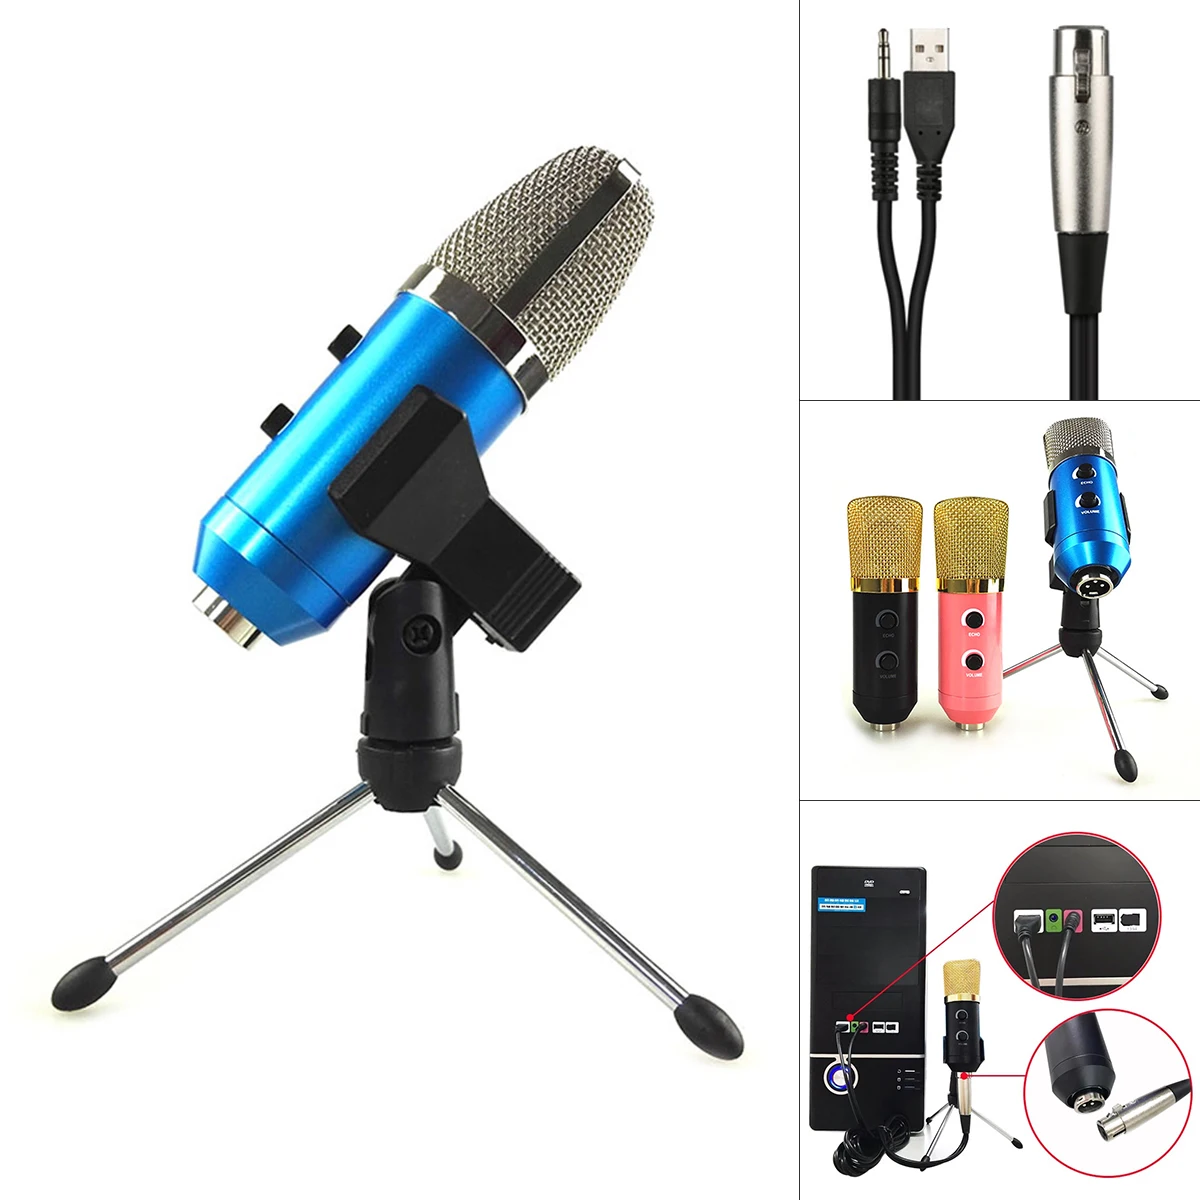 

MK -F100TL USB Wired Microphone USB Condenser Sound Recording Microphone with Stand for Live / Chat / Sing / Karaoke